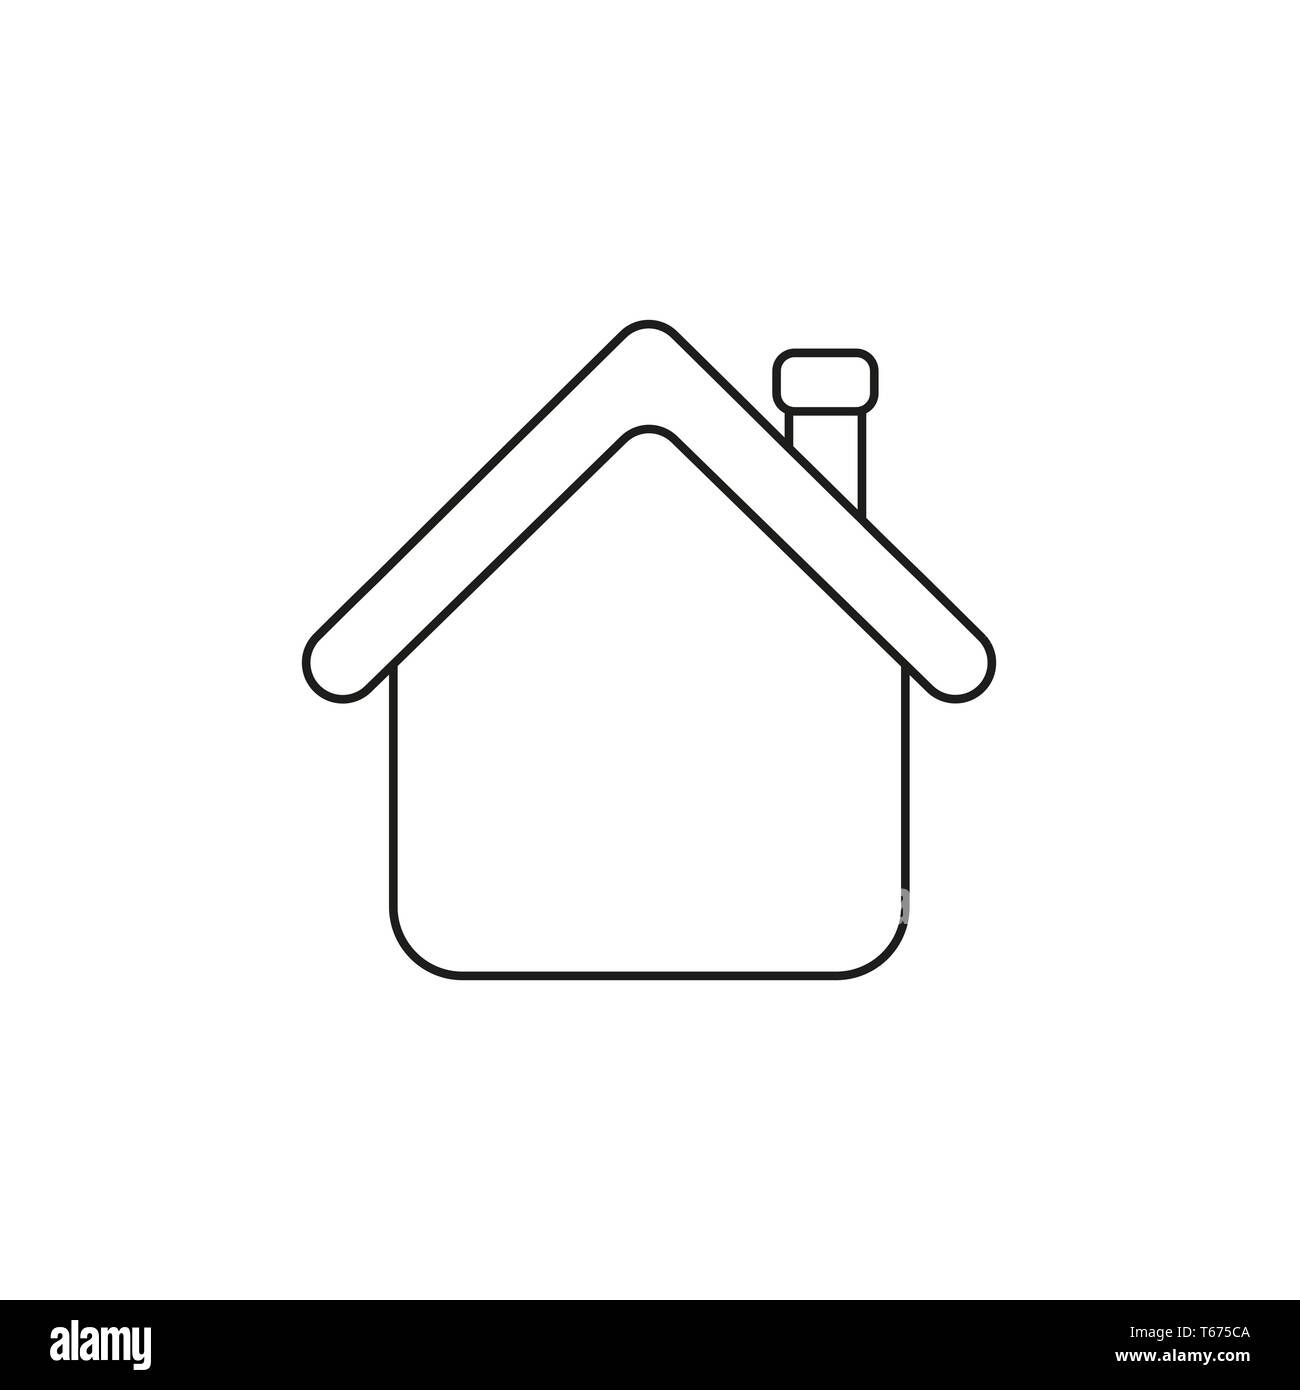 Vector icon concept of house with red roof. Black outlines. Stock Vector